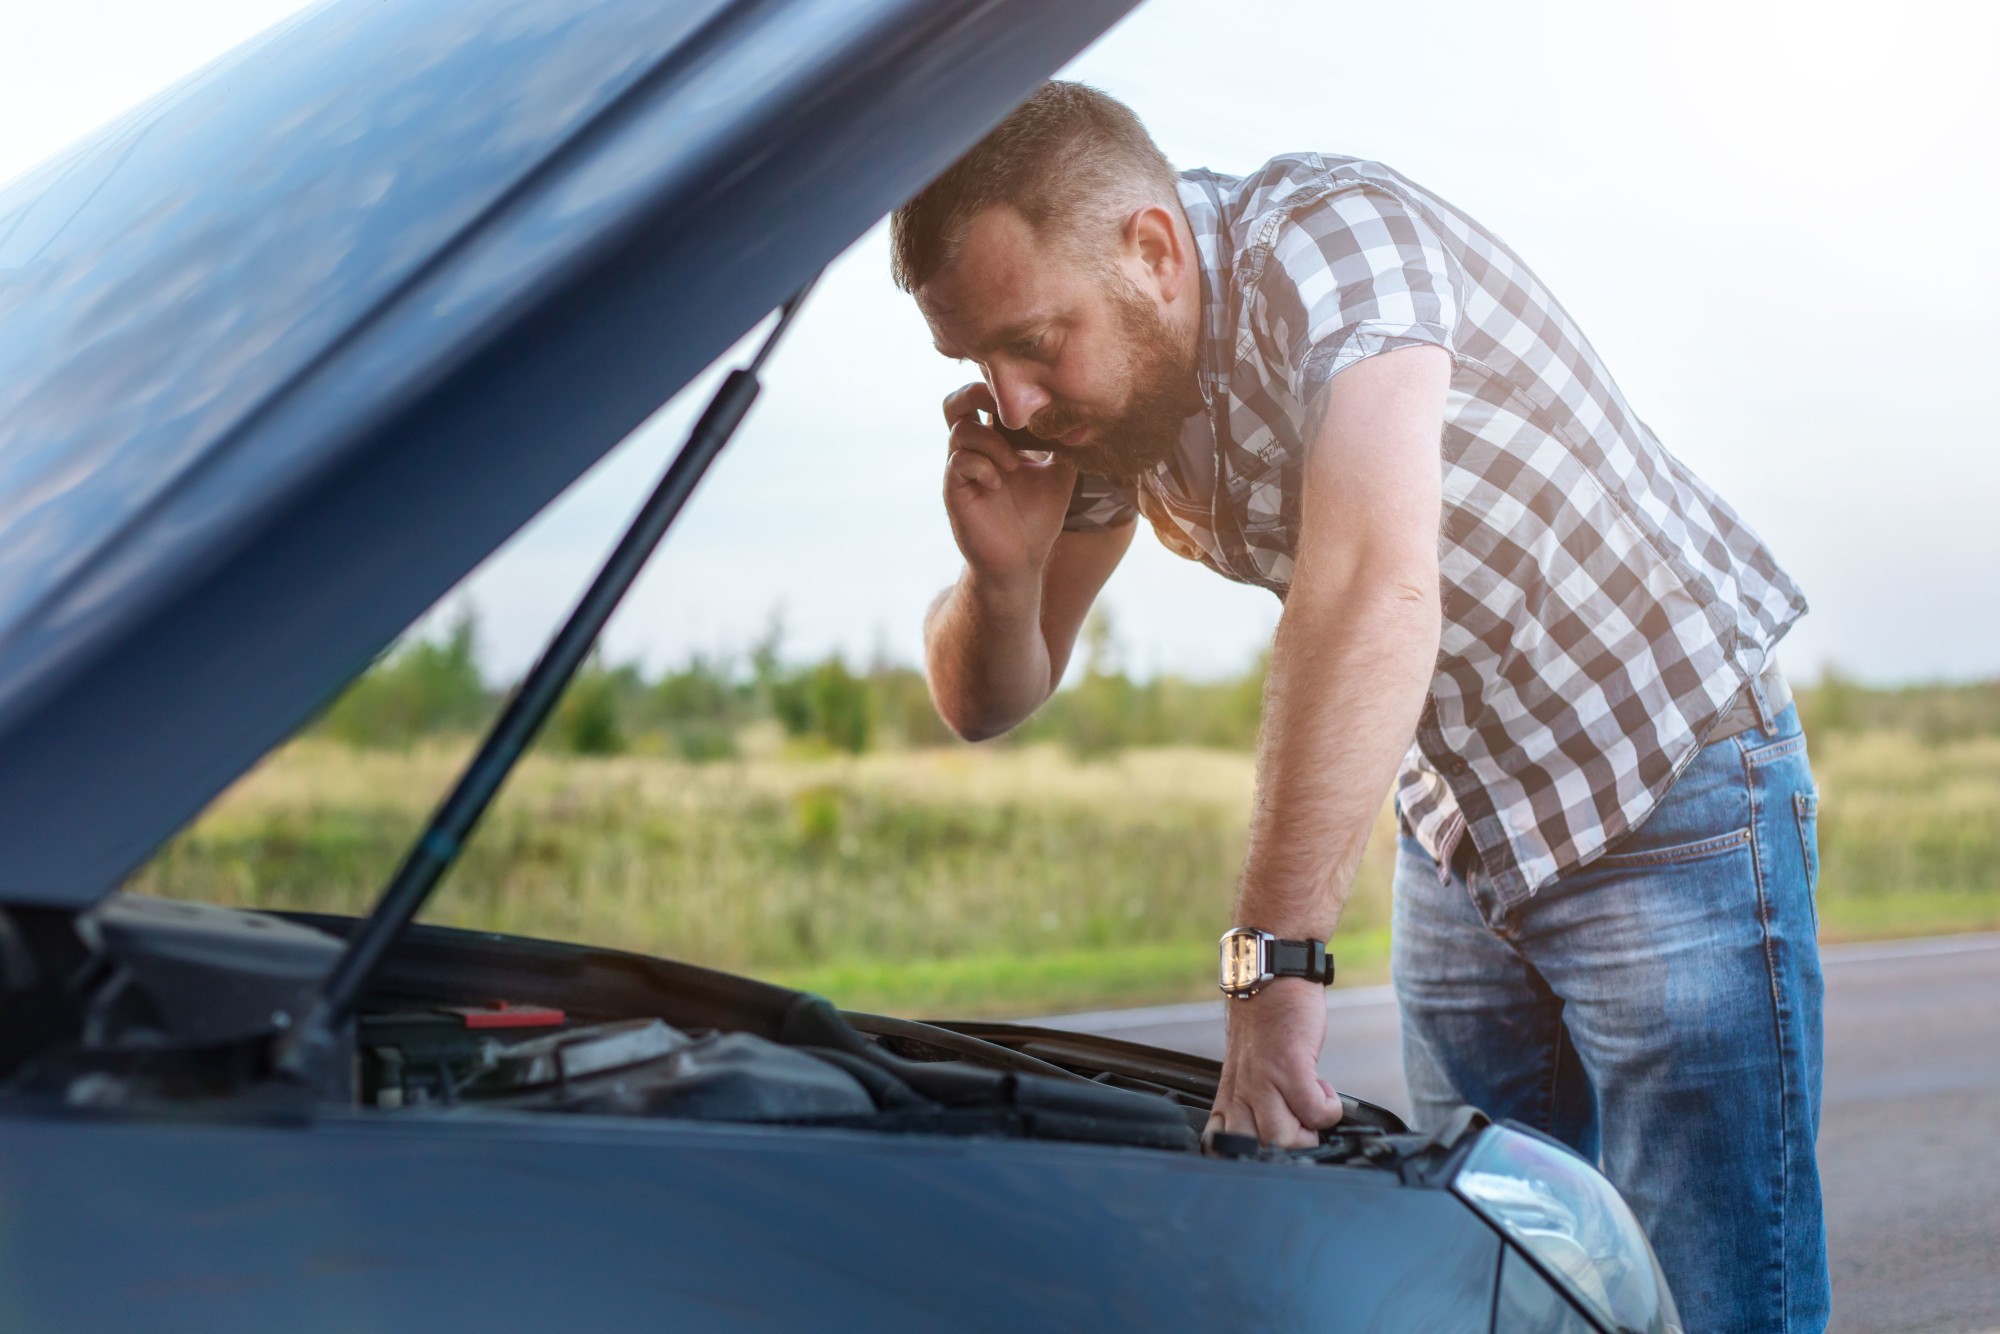 Tips For How To Fix Your Own Car's Problems